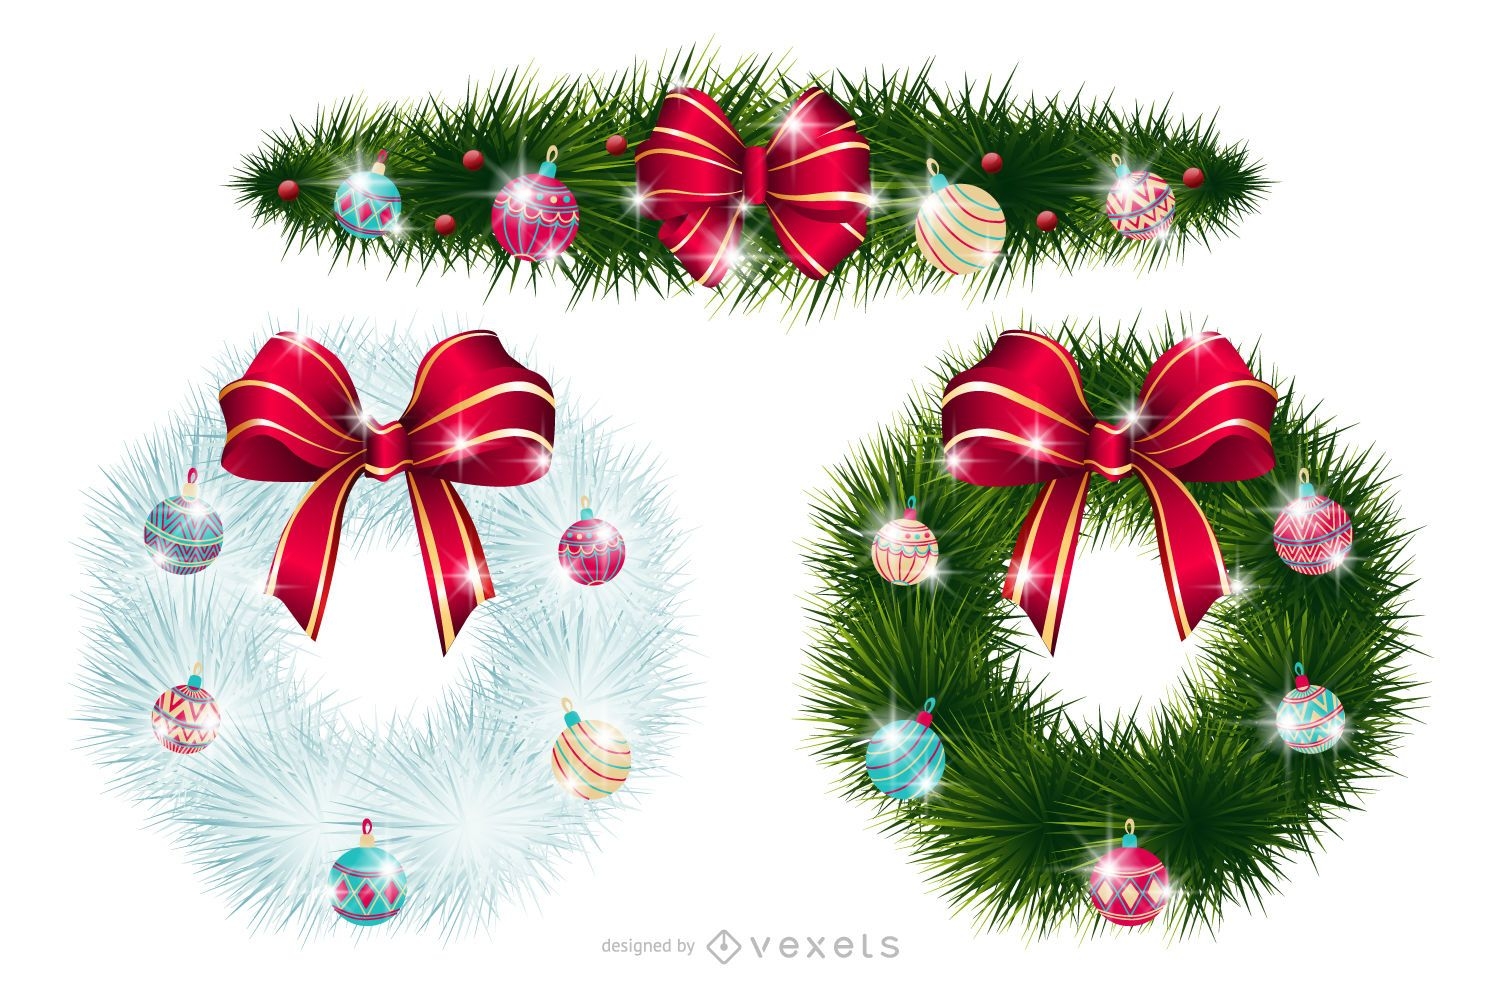 Xmas or Christmas Wreaths with Ornaments